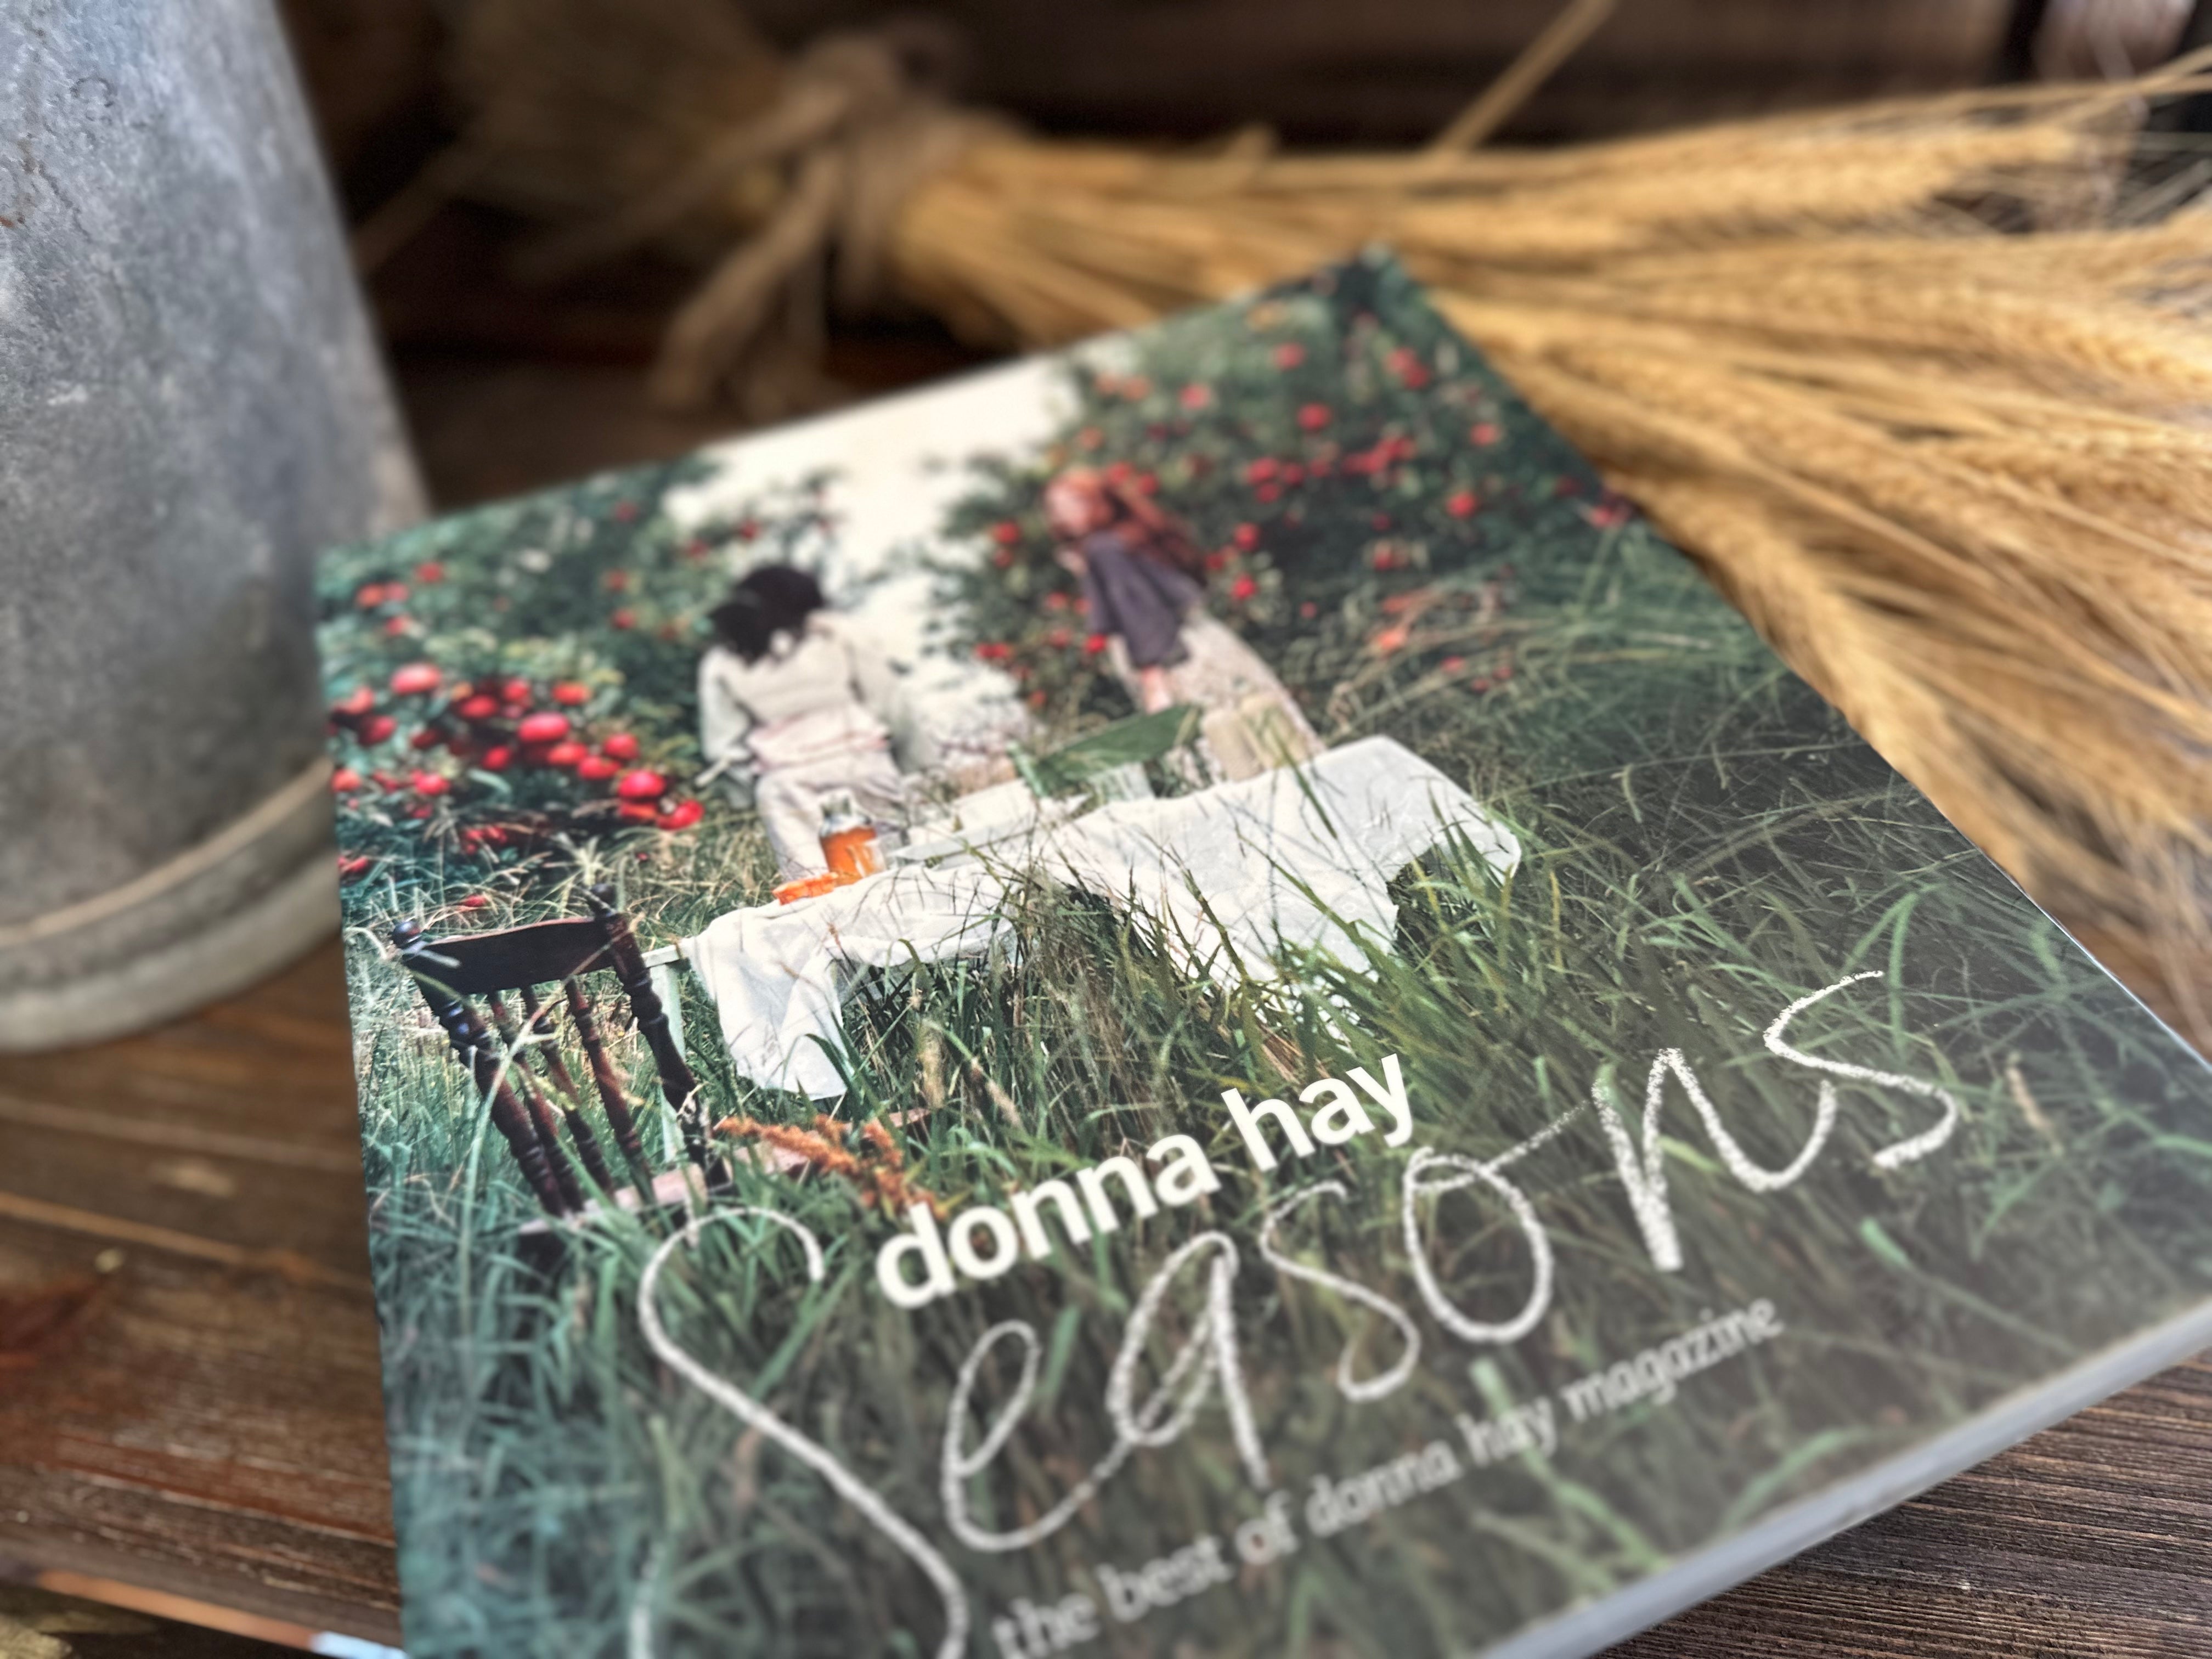 SEASONS Book by Donna Hay